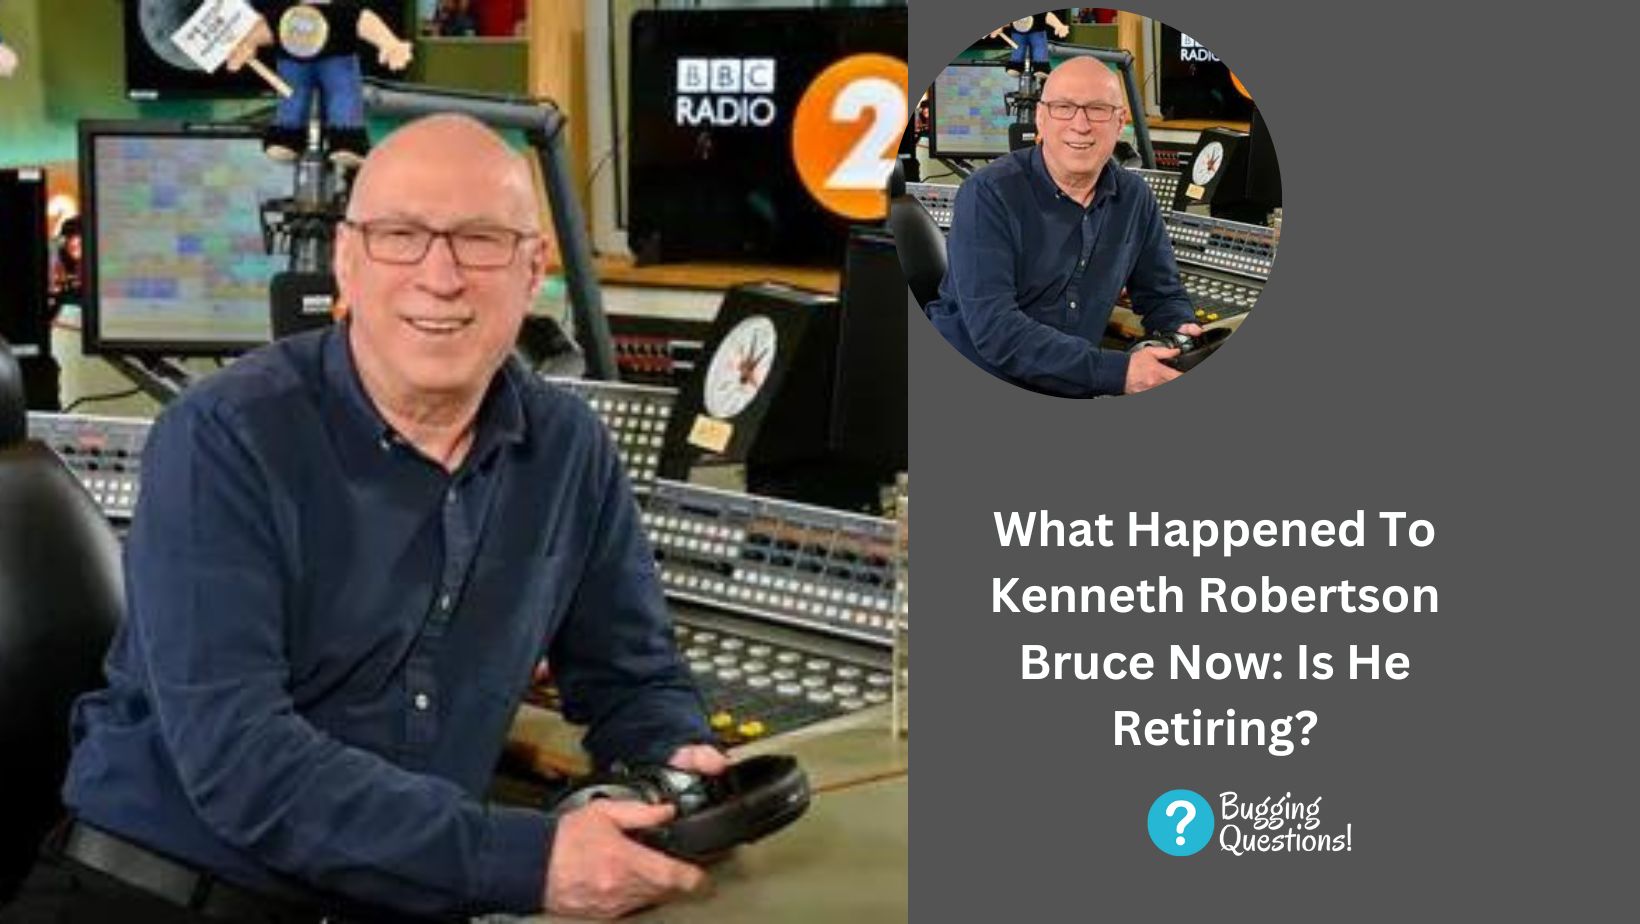 What Happened To Kenneth Robertson Bruce Now: Is He Retiring?